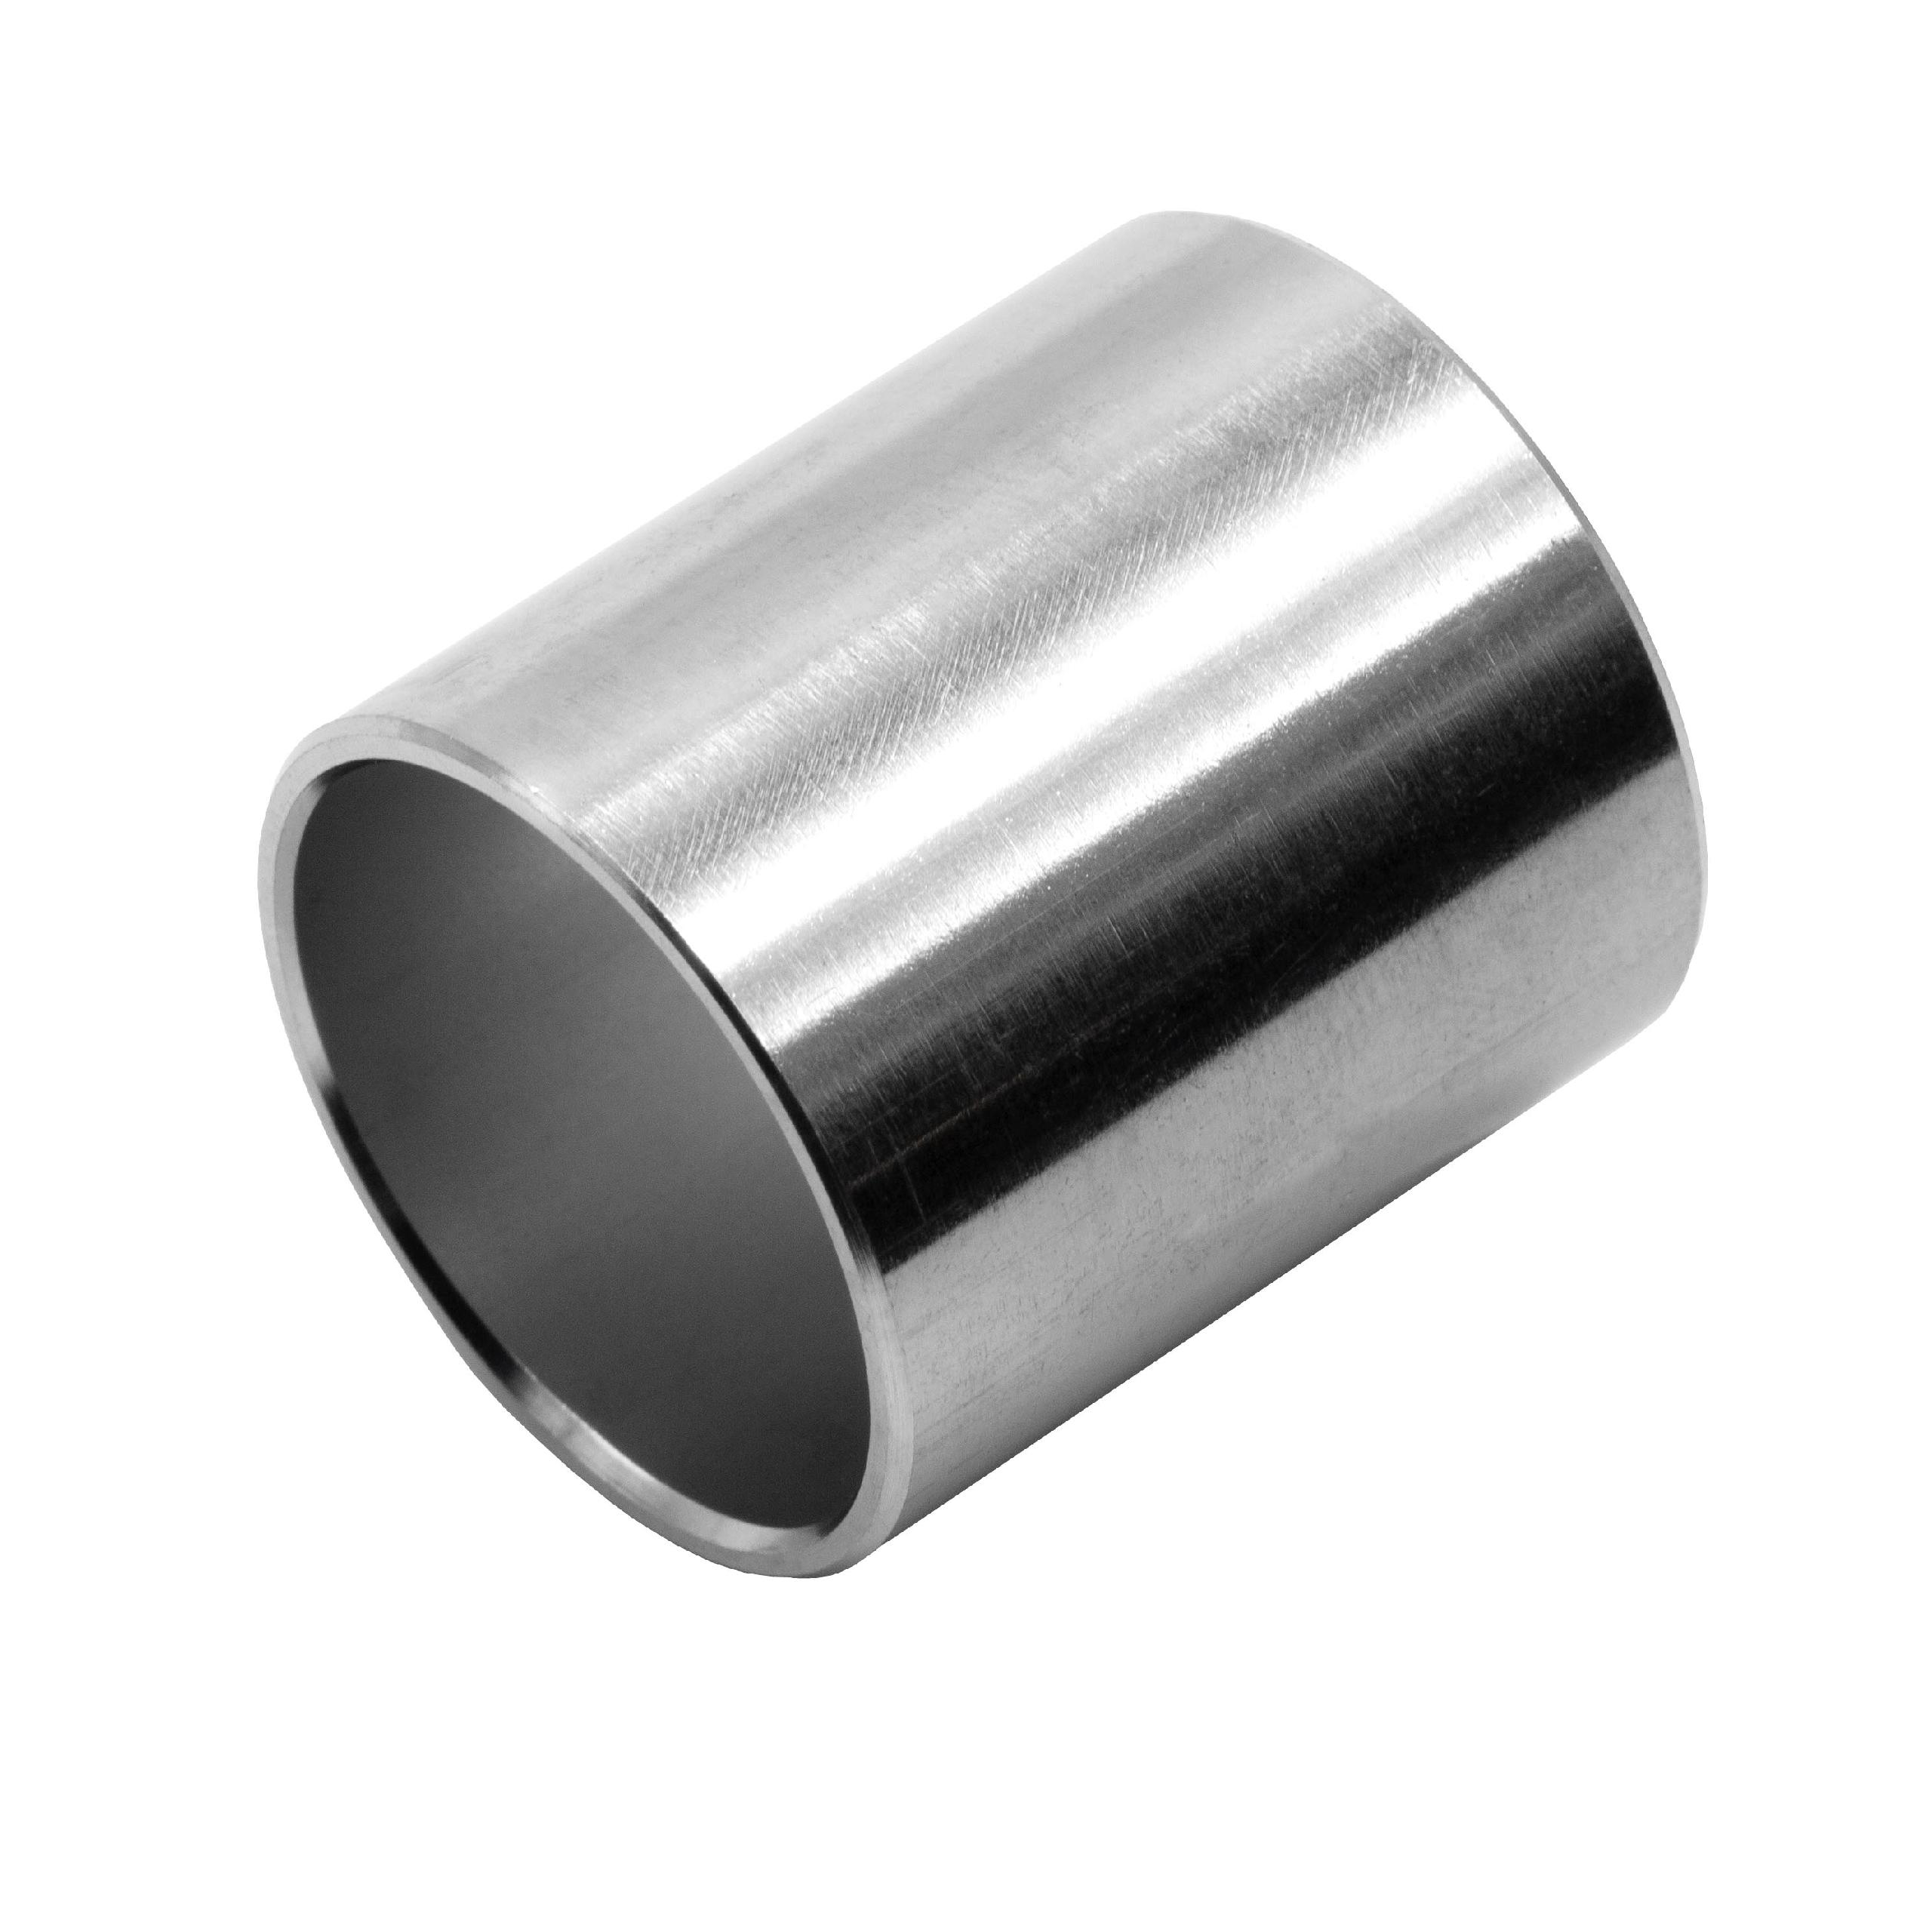 Guitar Slide 28mm stainless steel - Solid, Secure Hold